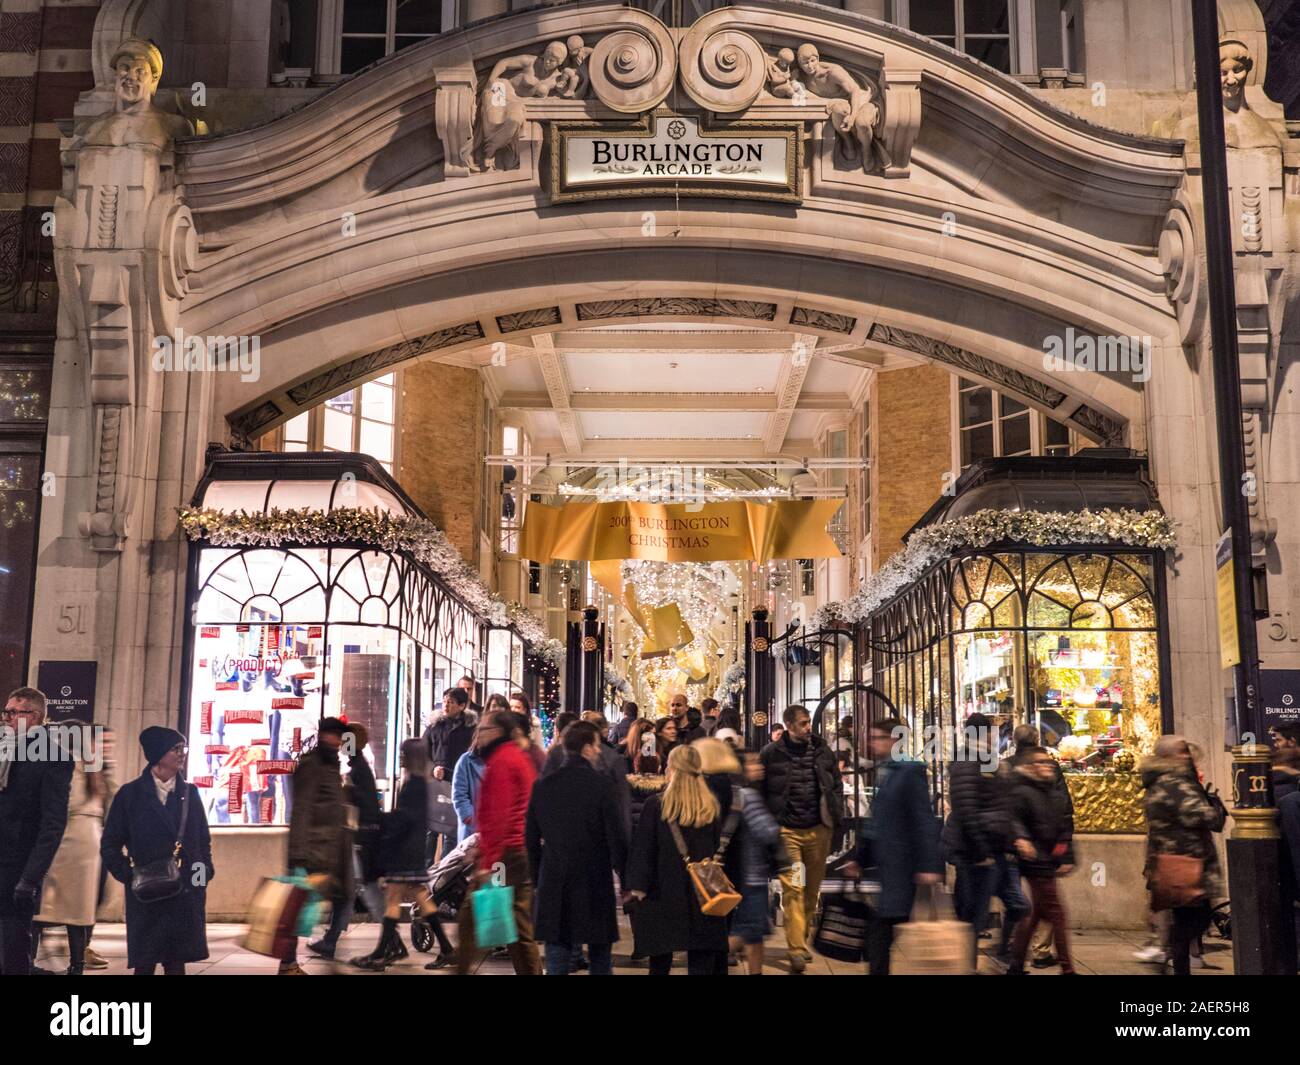 Burlington Arcade Piccadilly busy shoppers shopping at Christmas traditional luxury London shopping arcade busy entrance with shoppers shopping crowds in Piccadilly with Christmas lights and decorations at dusk Piccadilly London UK Stock Photo